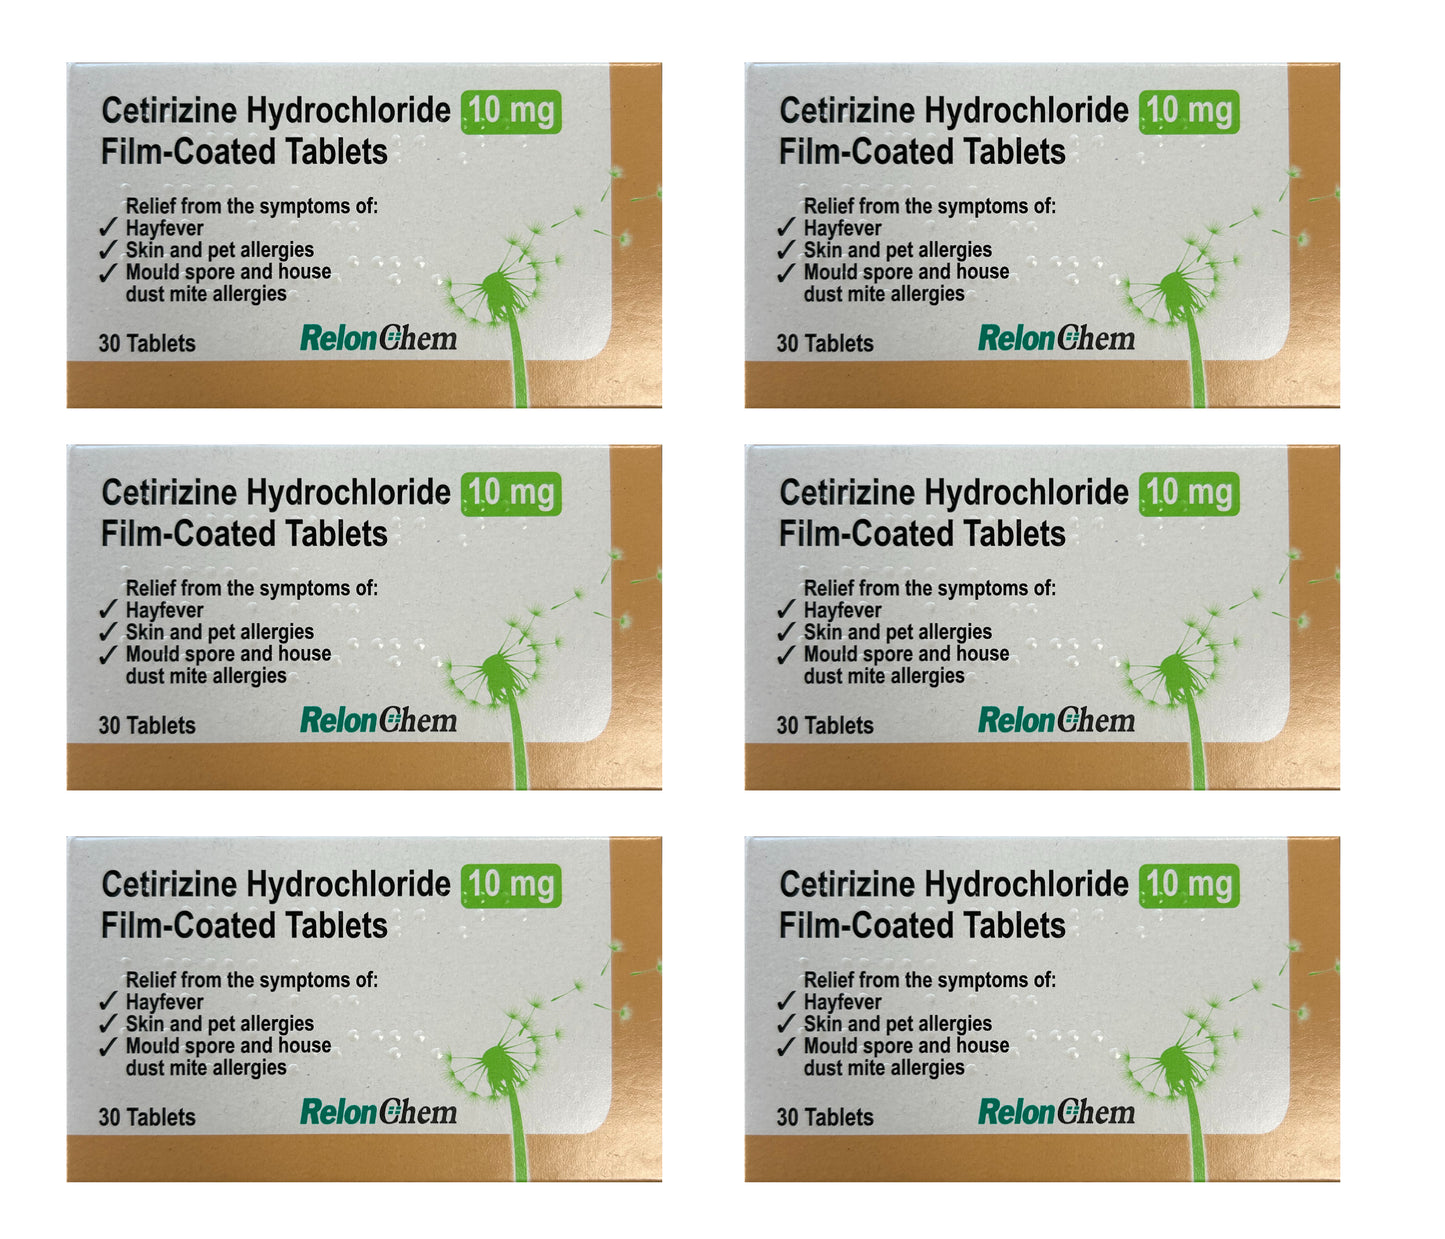 180 Tablets Cetirizine Hydrochloride Film Coated Hayfever & Allergy Relief Tablets (6 Months Supply)